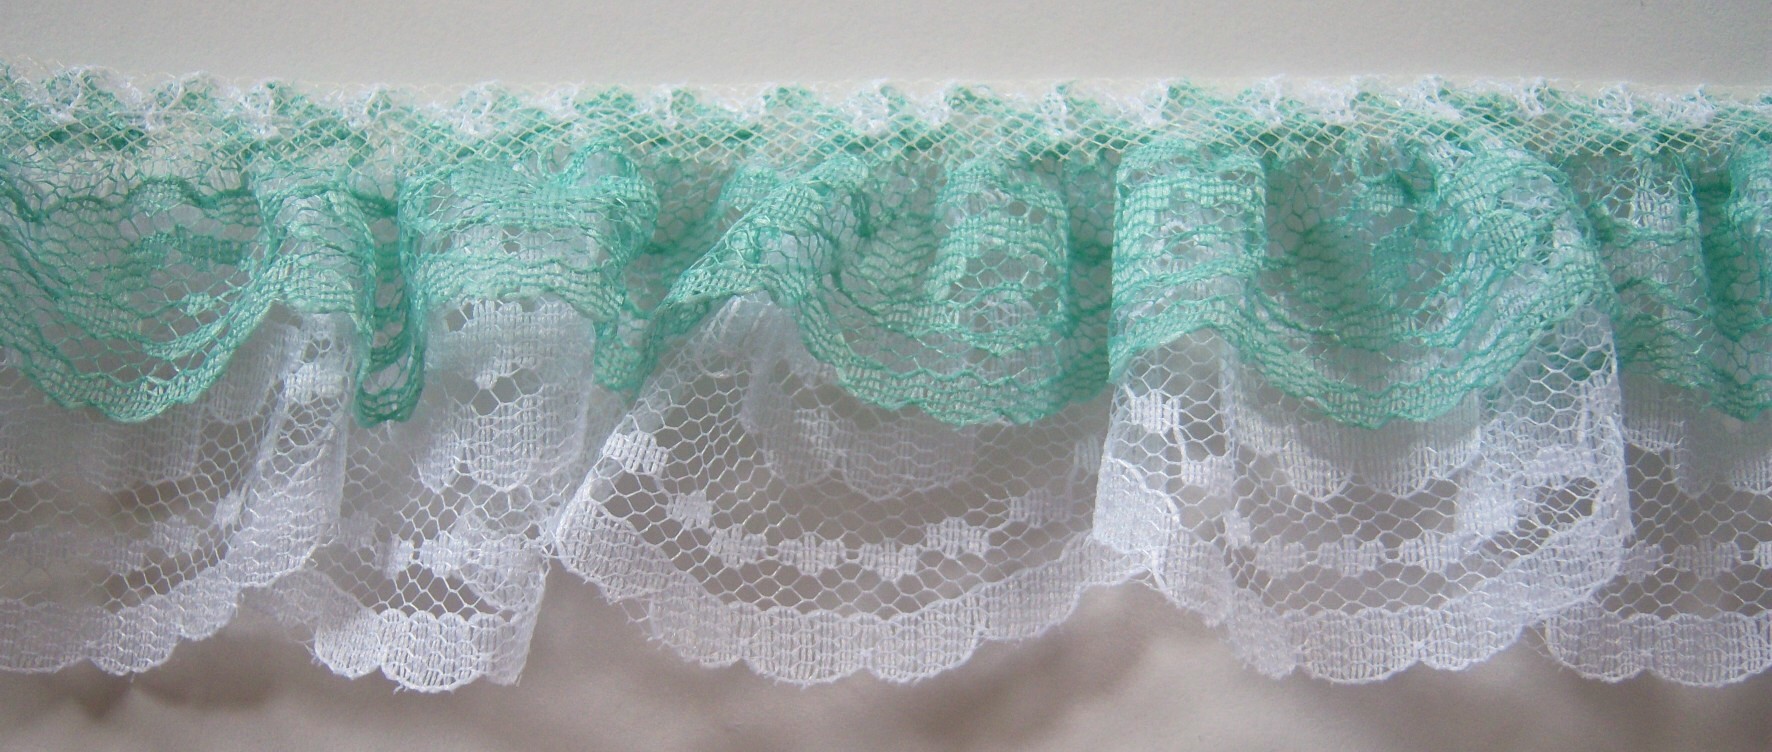 Mint/White Double Gathered Lace